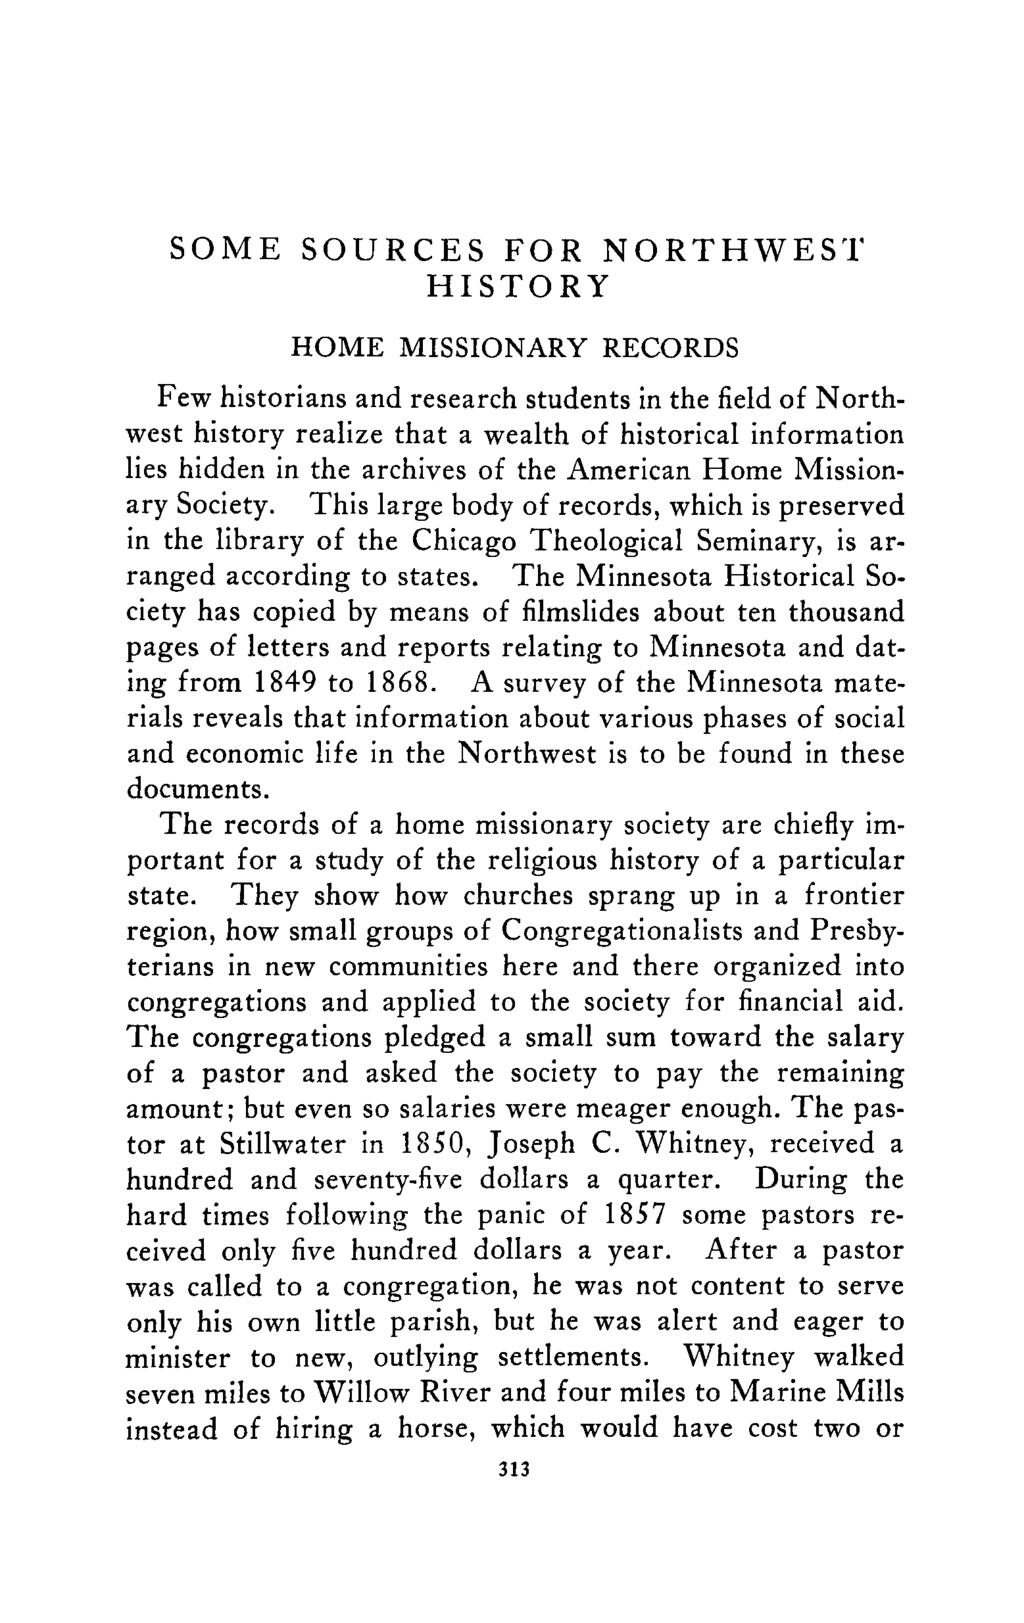 SOME SOURCES FOR NORTHWEST HISTORY HOME MISSIONARY RECORDS Few historians and research students In the field of Northwest history realize that a wealth of historical information lies hidden In the